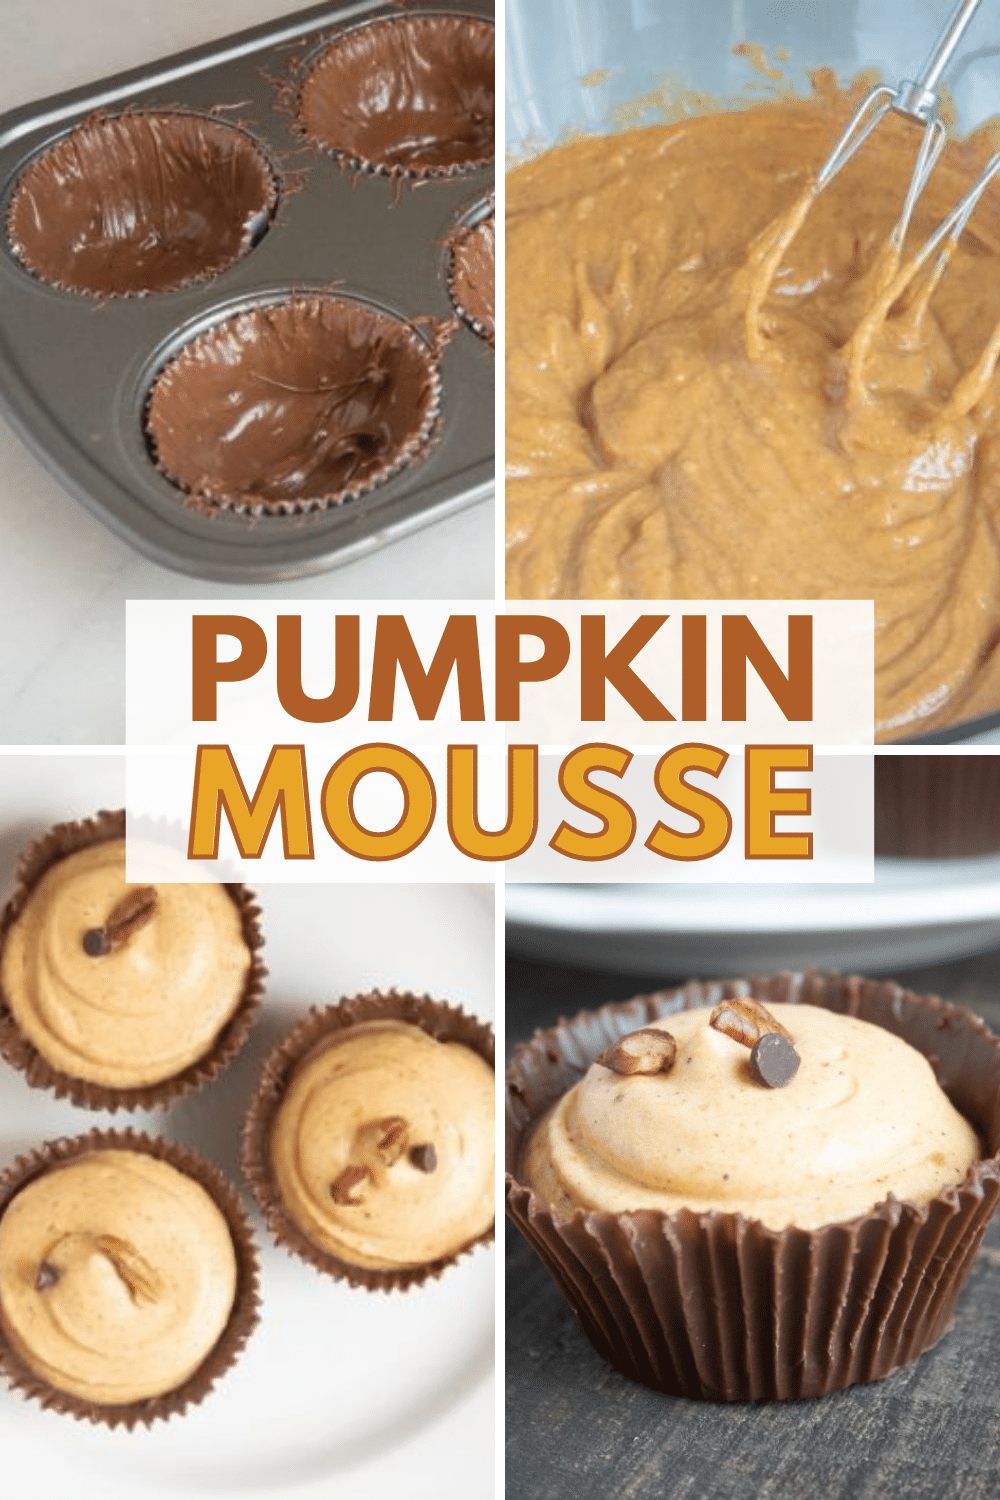 Easy pumpkin mousse is an elegant dessert recipe that is actually very simple to make. This is a great Thanksgiving dessert recipe for a crowd. #mousse #pumpkin #dessert via @wondermomwannab